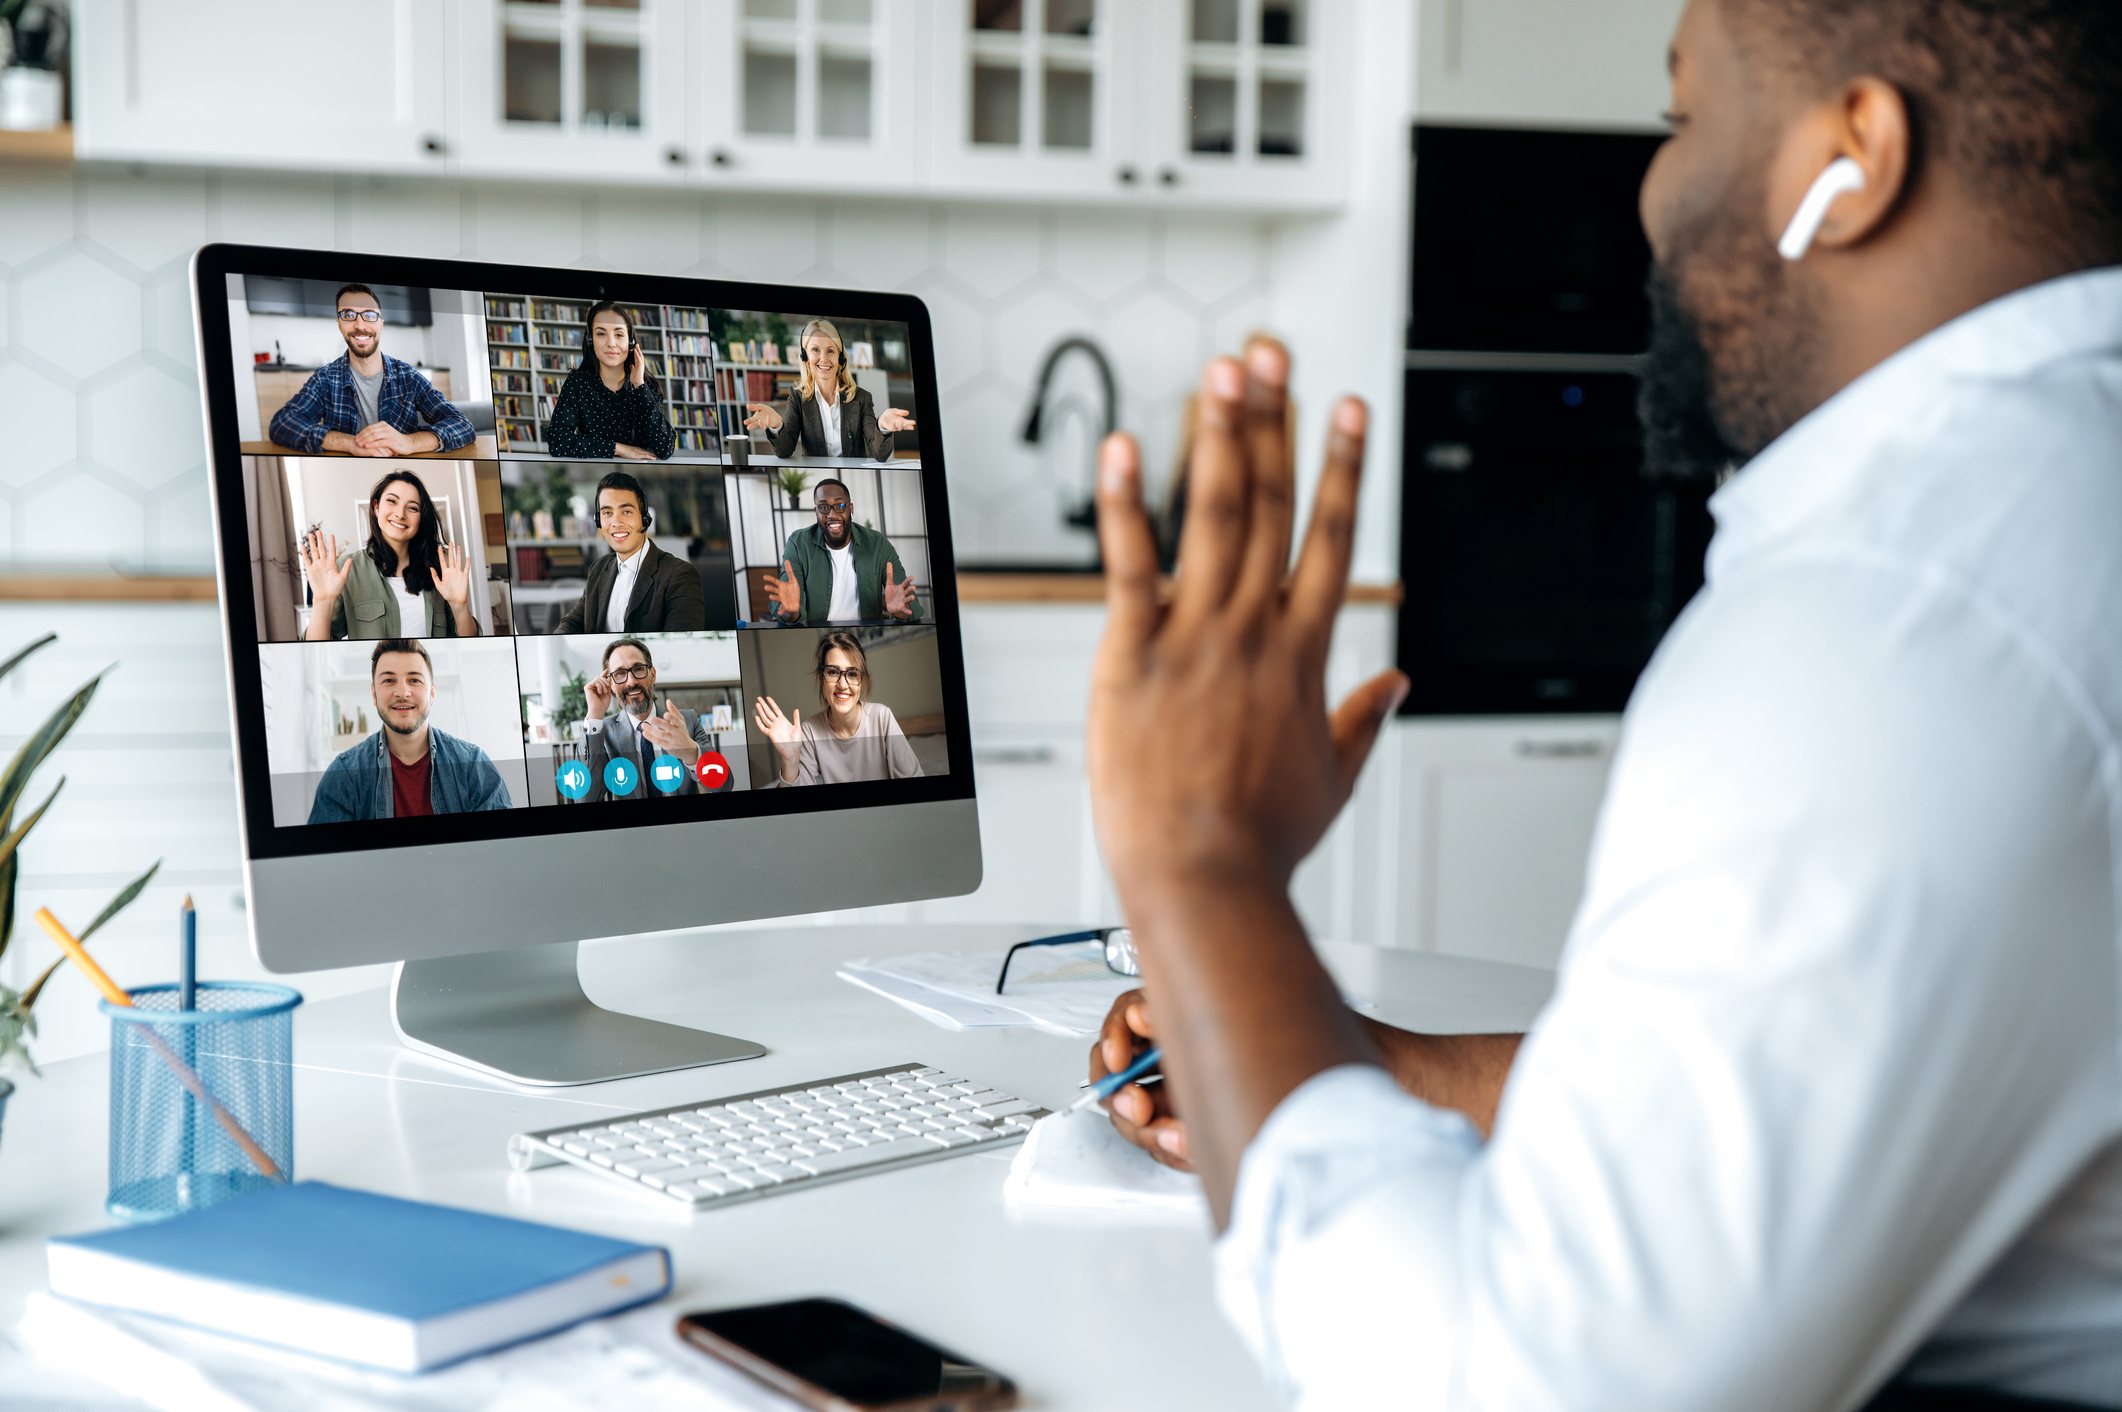 Man having a video conference with his colleagues creating a virtual watercooler moment